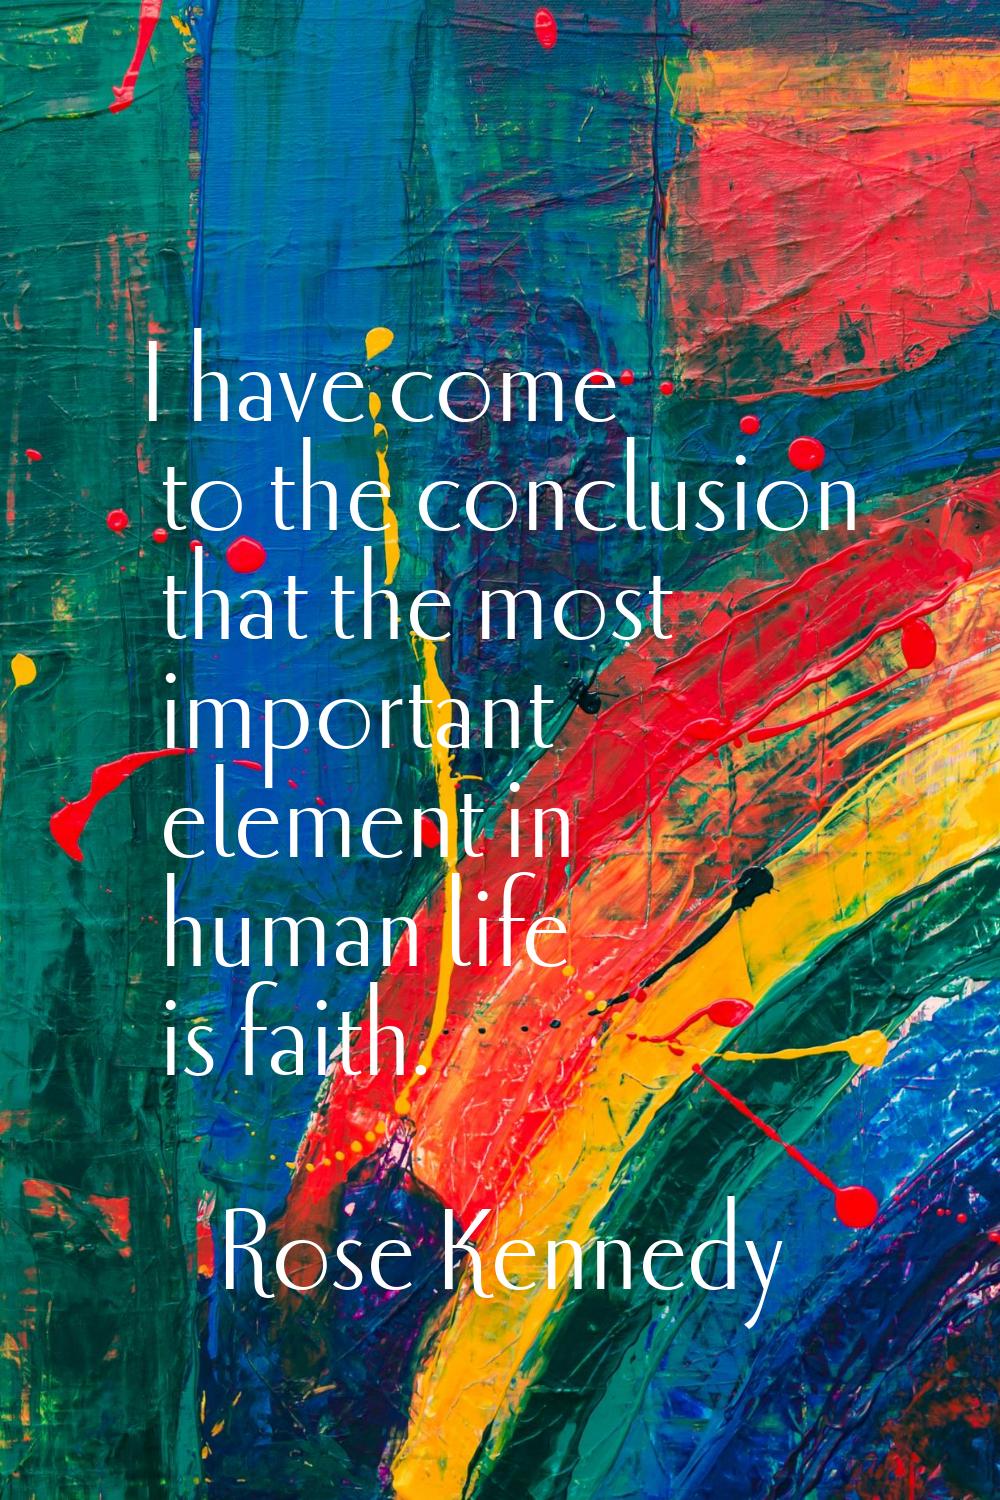 I have come to the conclusion that the most important element in human life is faith.